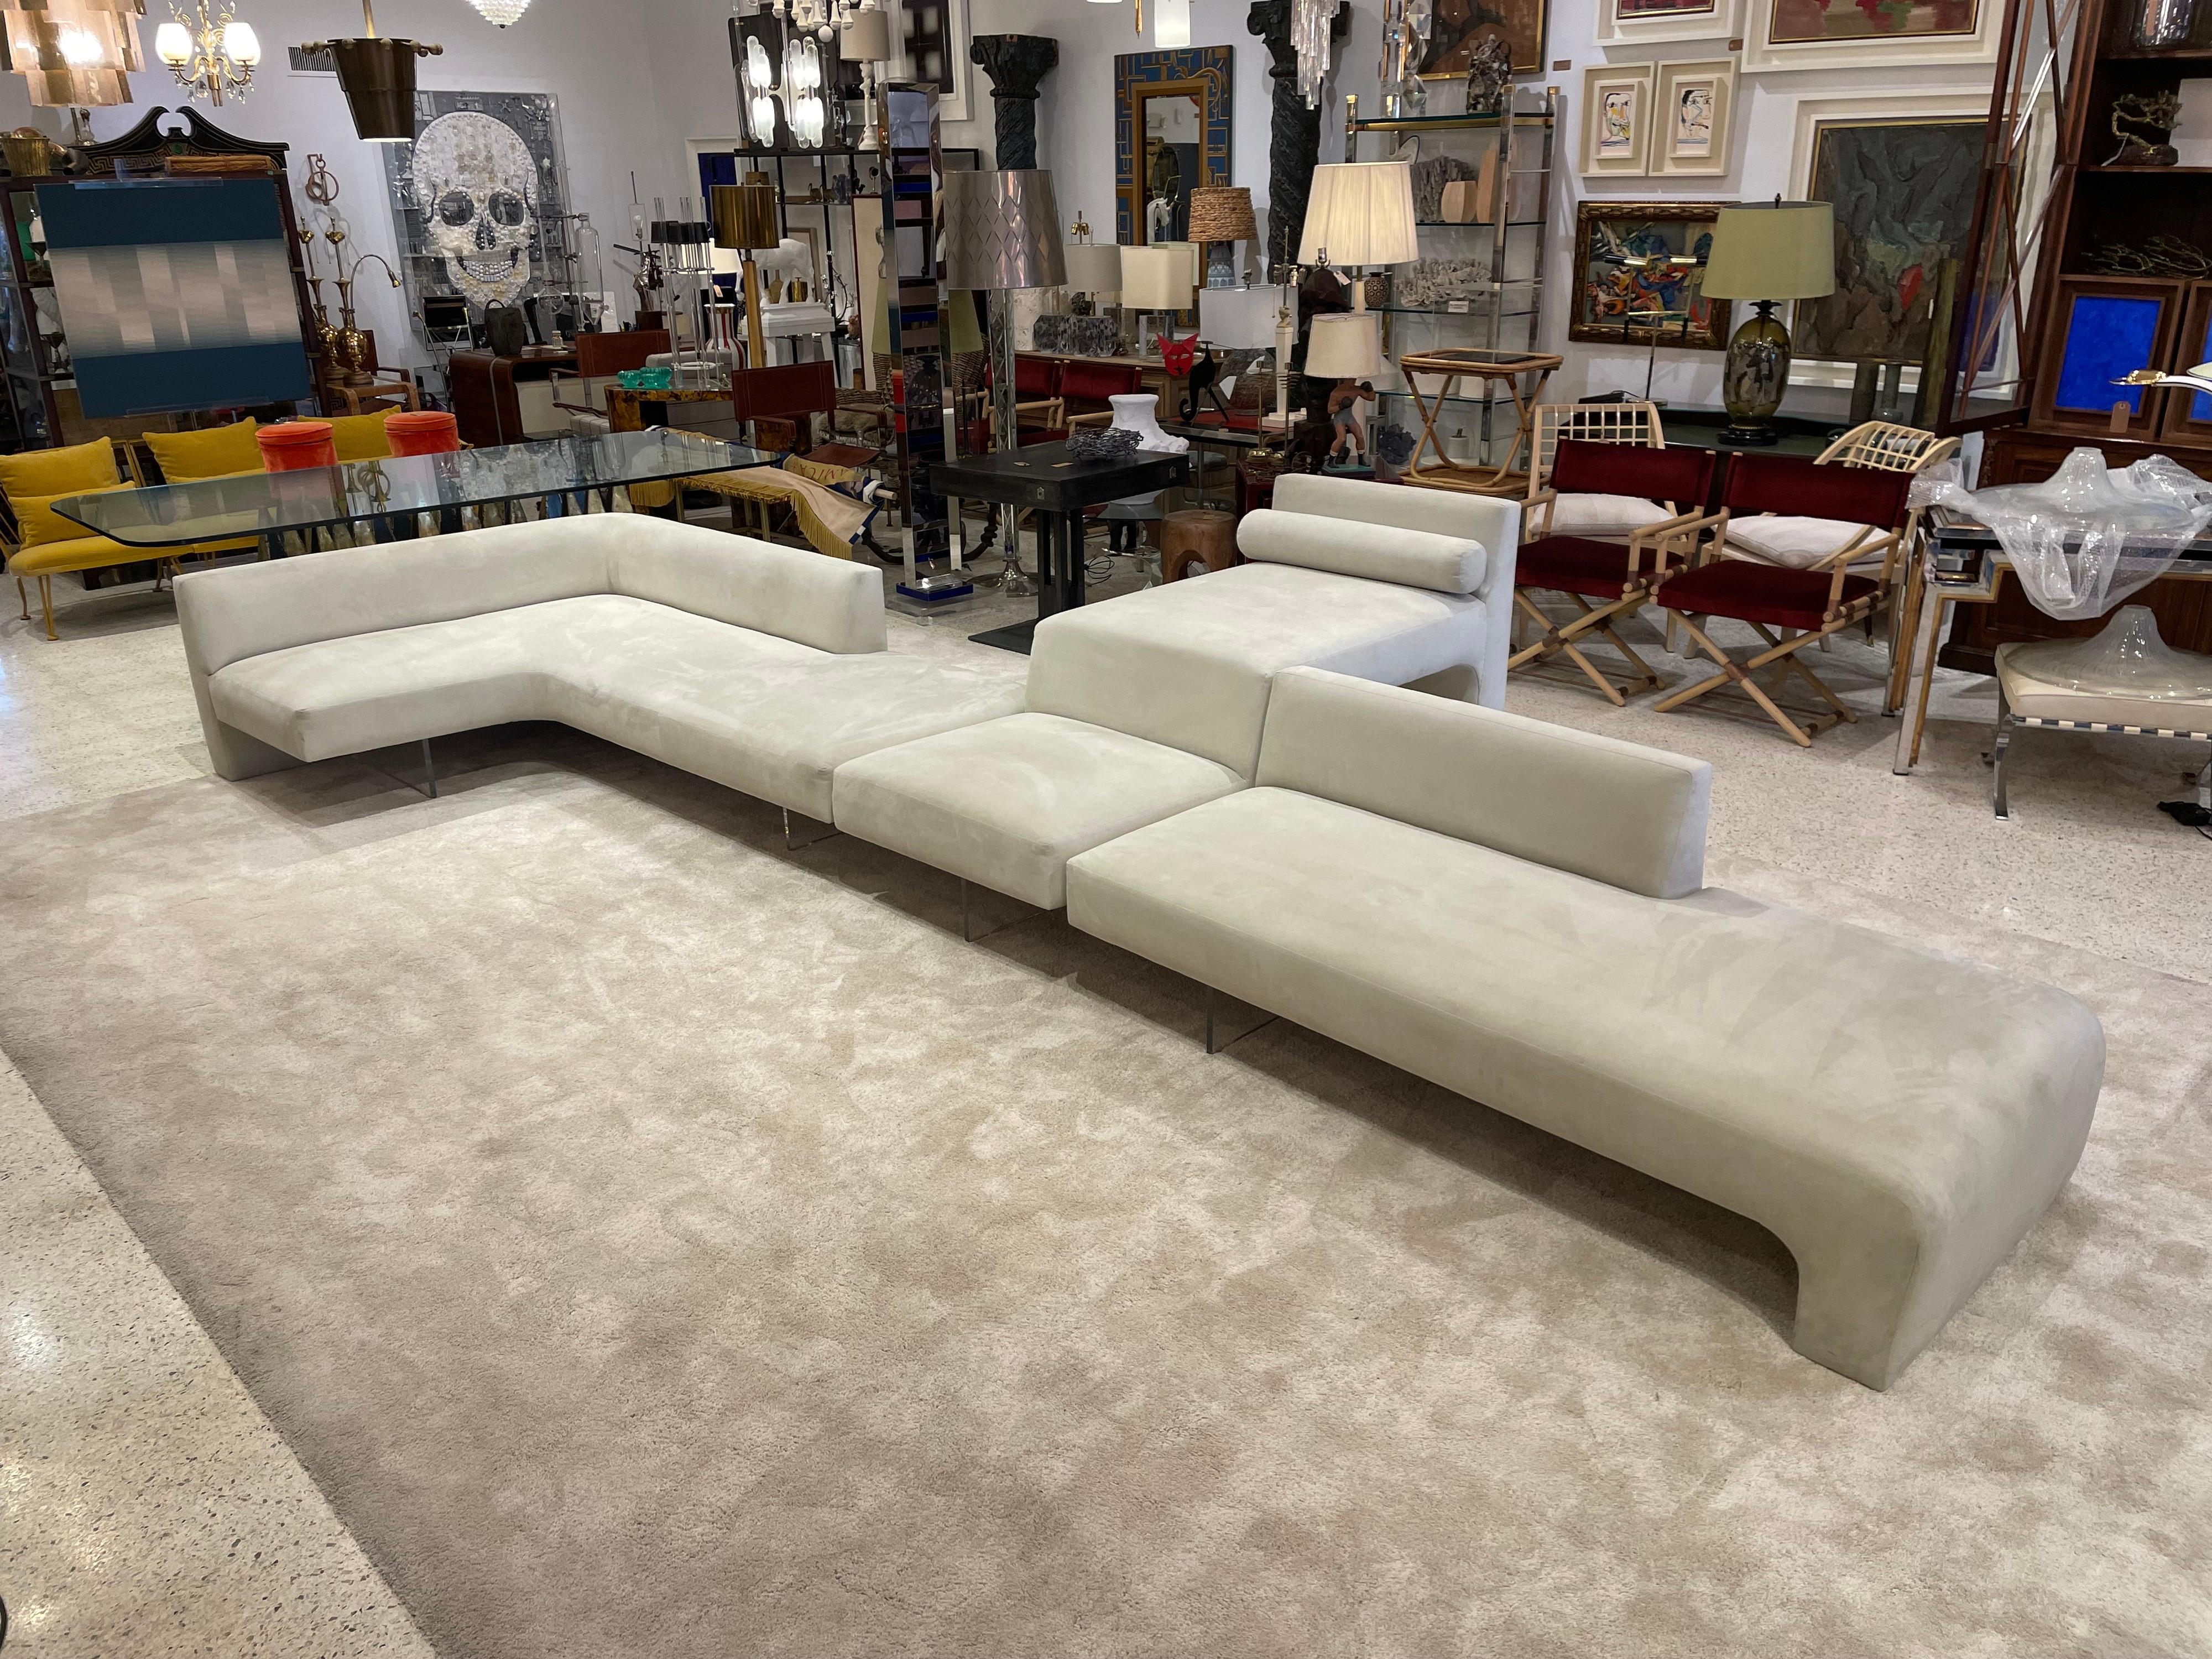 This Iconic Valdimir Kagan sectional sofa in 3 parts (corner, tiered chaise and long straight piece), is all original with Original Alcantara Ultrasuede fabric. 

Dimensions of corner section: 92 inches wide, 62 inches deep at its longest, 34